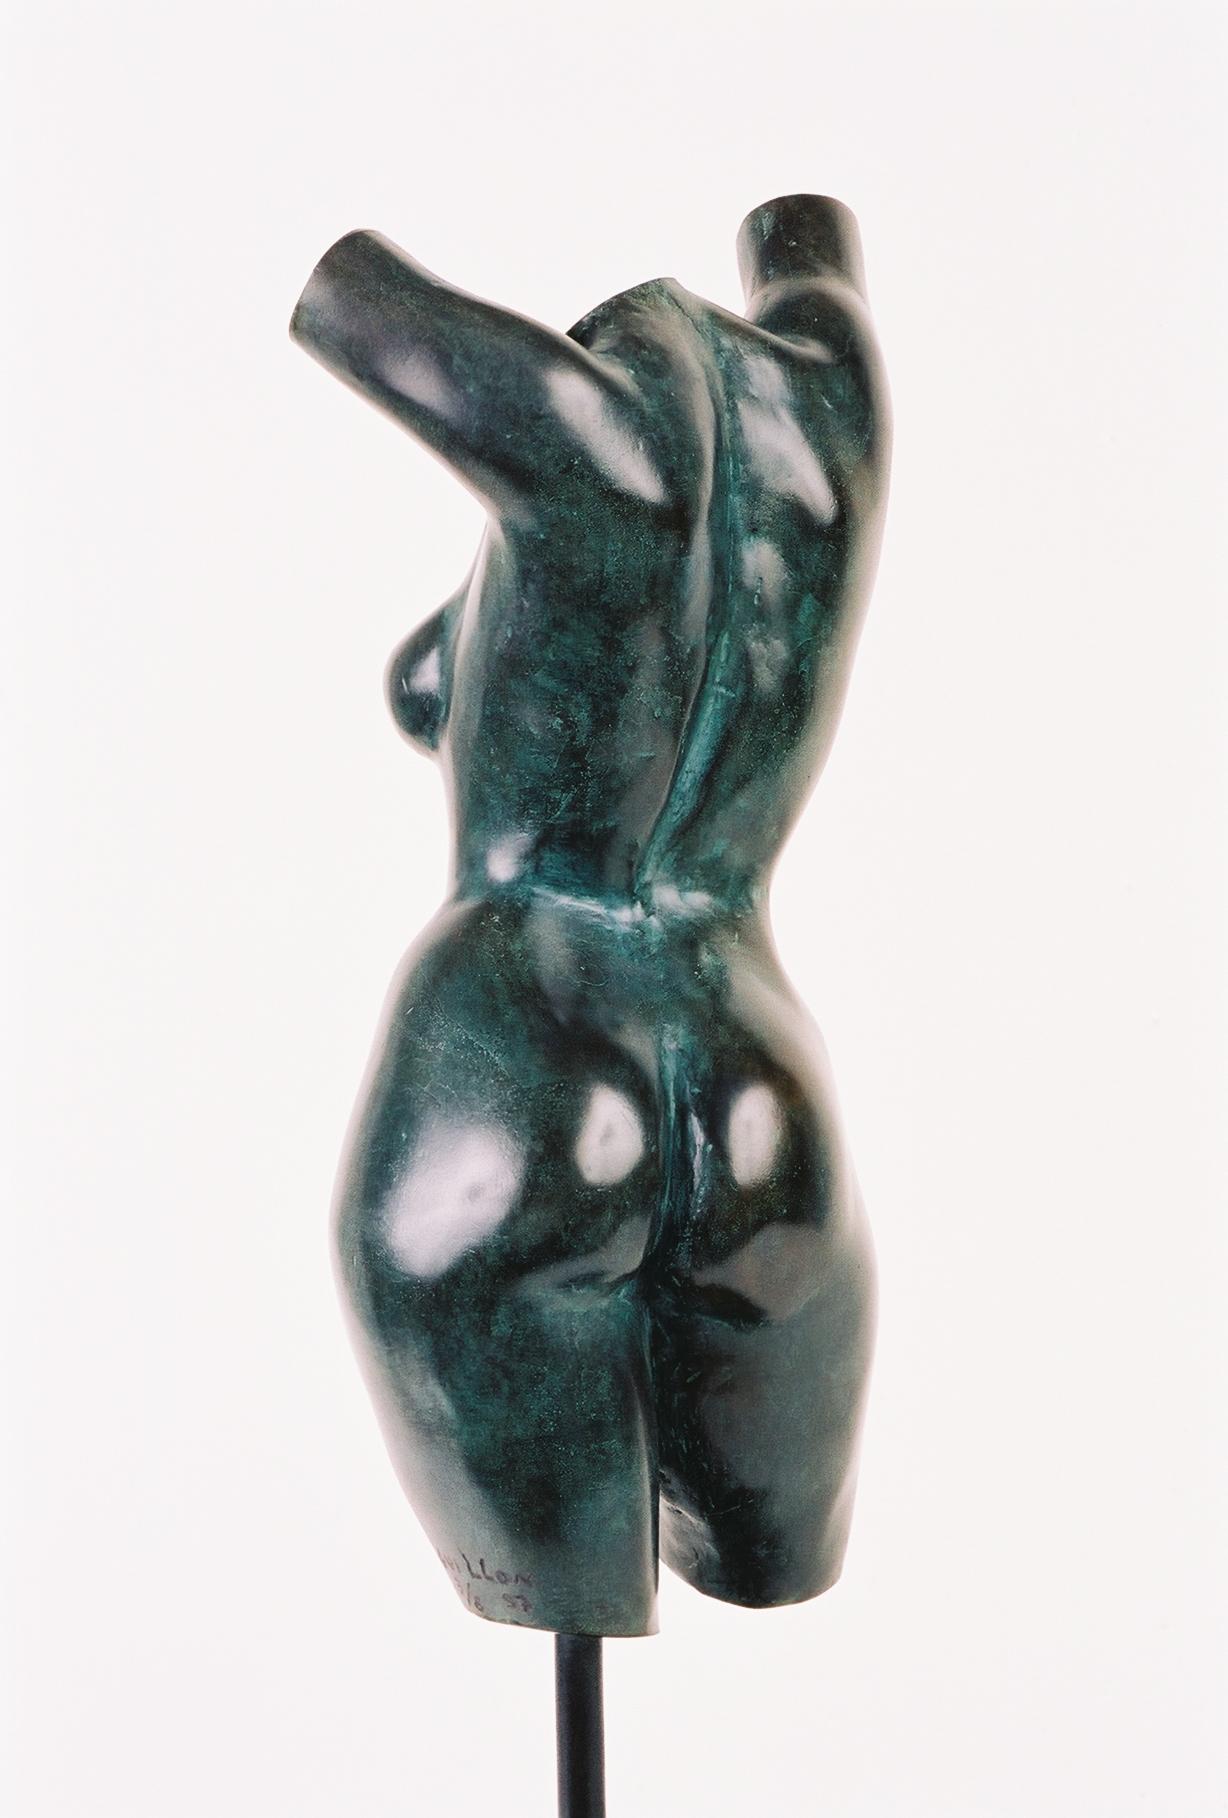 Caroline's Torso (Torse de Caroline) is a bronze sculpture by French contemporary sculptor Yann Guillon.
Limited edition of 8 + 4 artist's proofs. signed and numbered, sold with brass base (Height of the sculpture: 30 cm, total height with base and